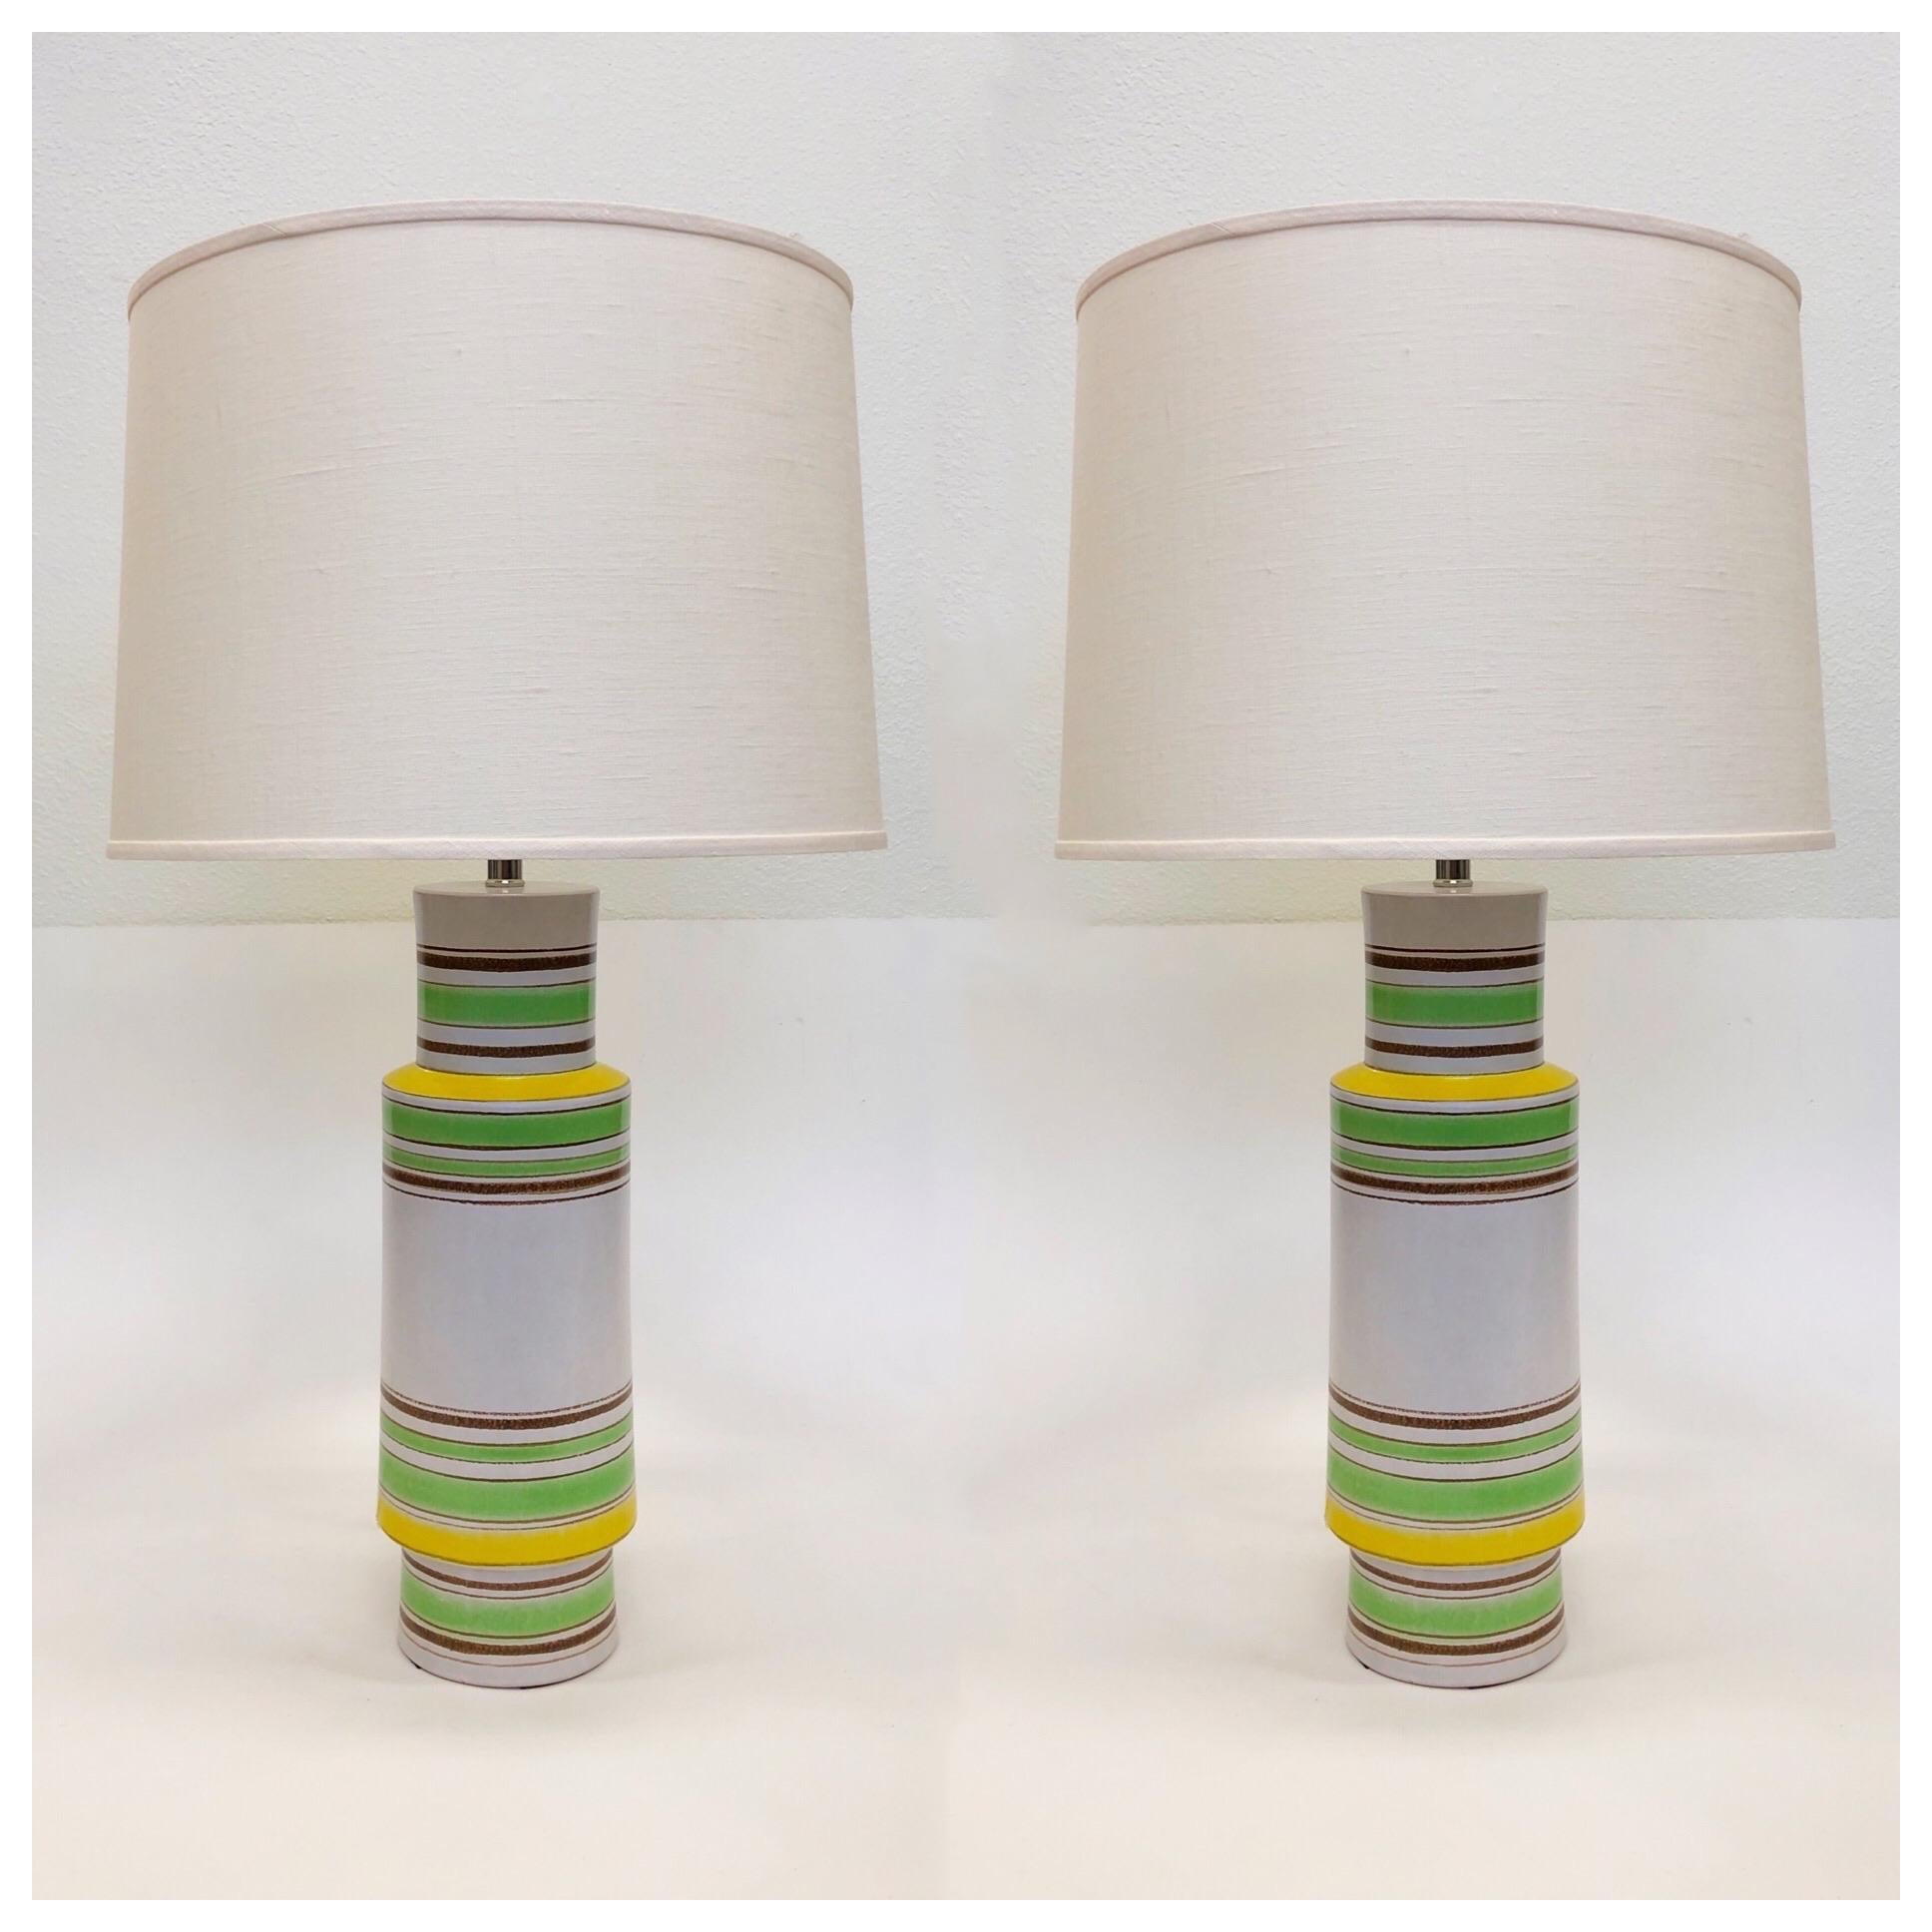 A beautiful pair of Italian ceramic table lamps designed by Bitossi in the 1970s
The lamps are ceramic with a white, lime green, yellow and brown glazed design. The lamps have been newly rewired with new polish nickel hardware and new vanilla linen